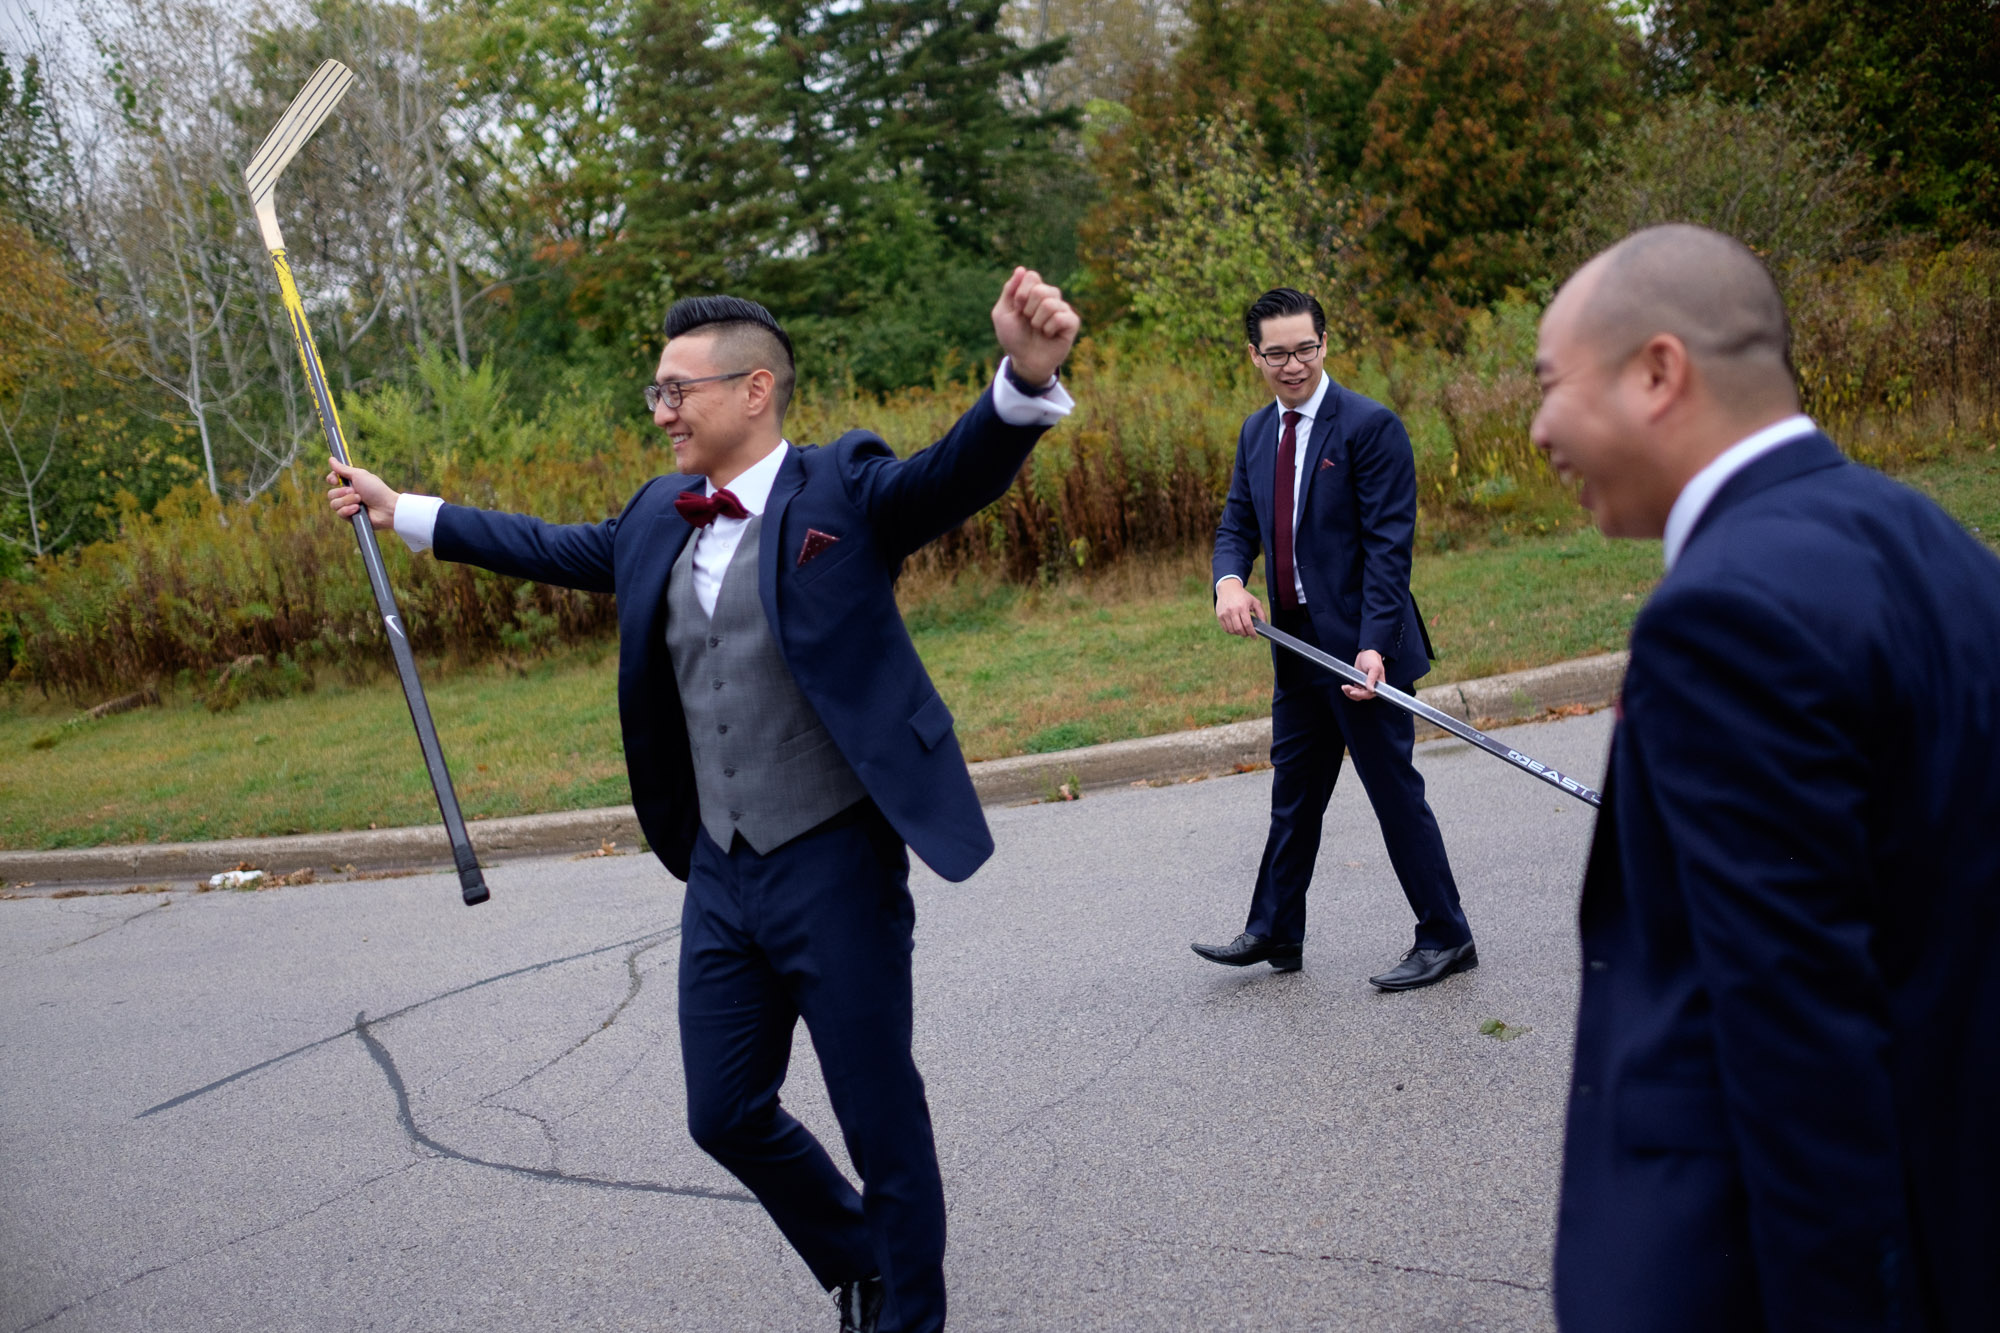  Chris plays road hockey with his groomsmen before his wedding at Madsens Greenhouse. 